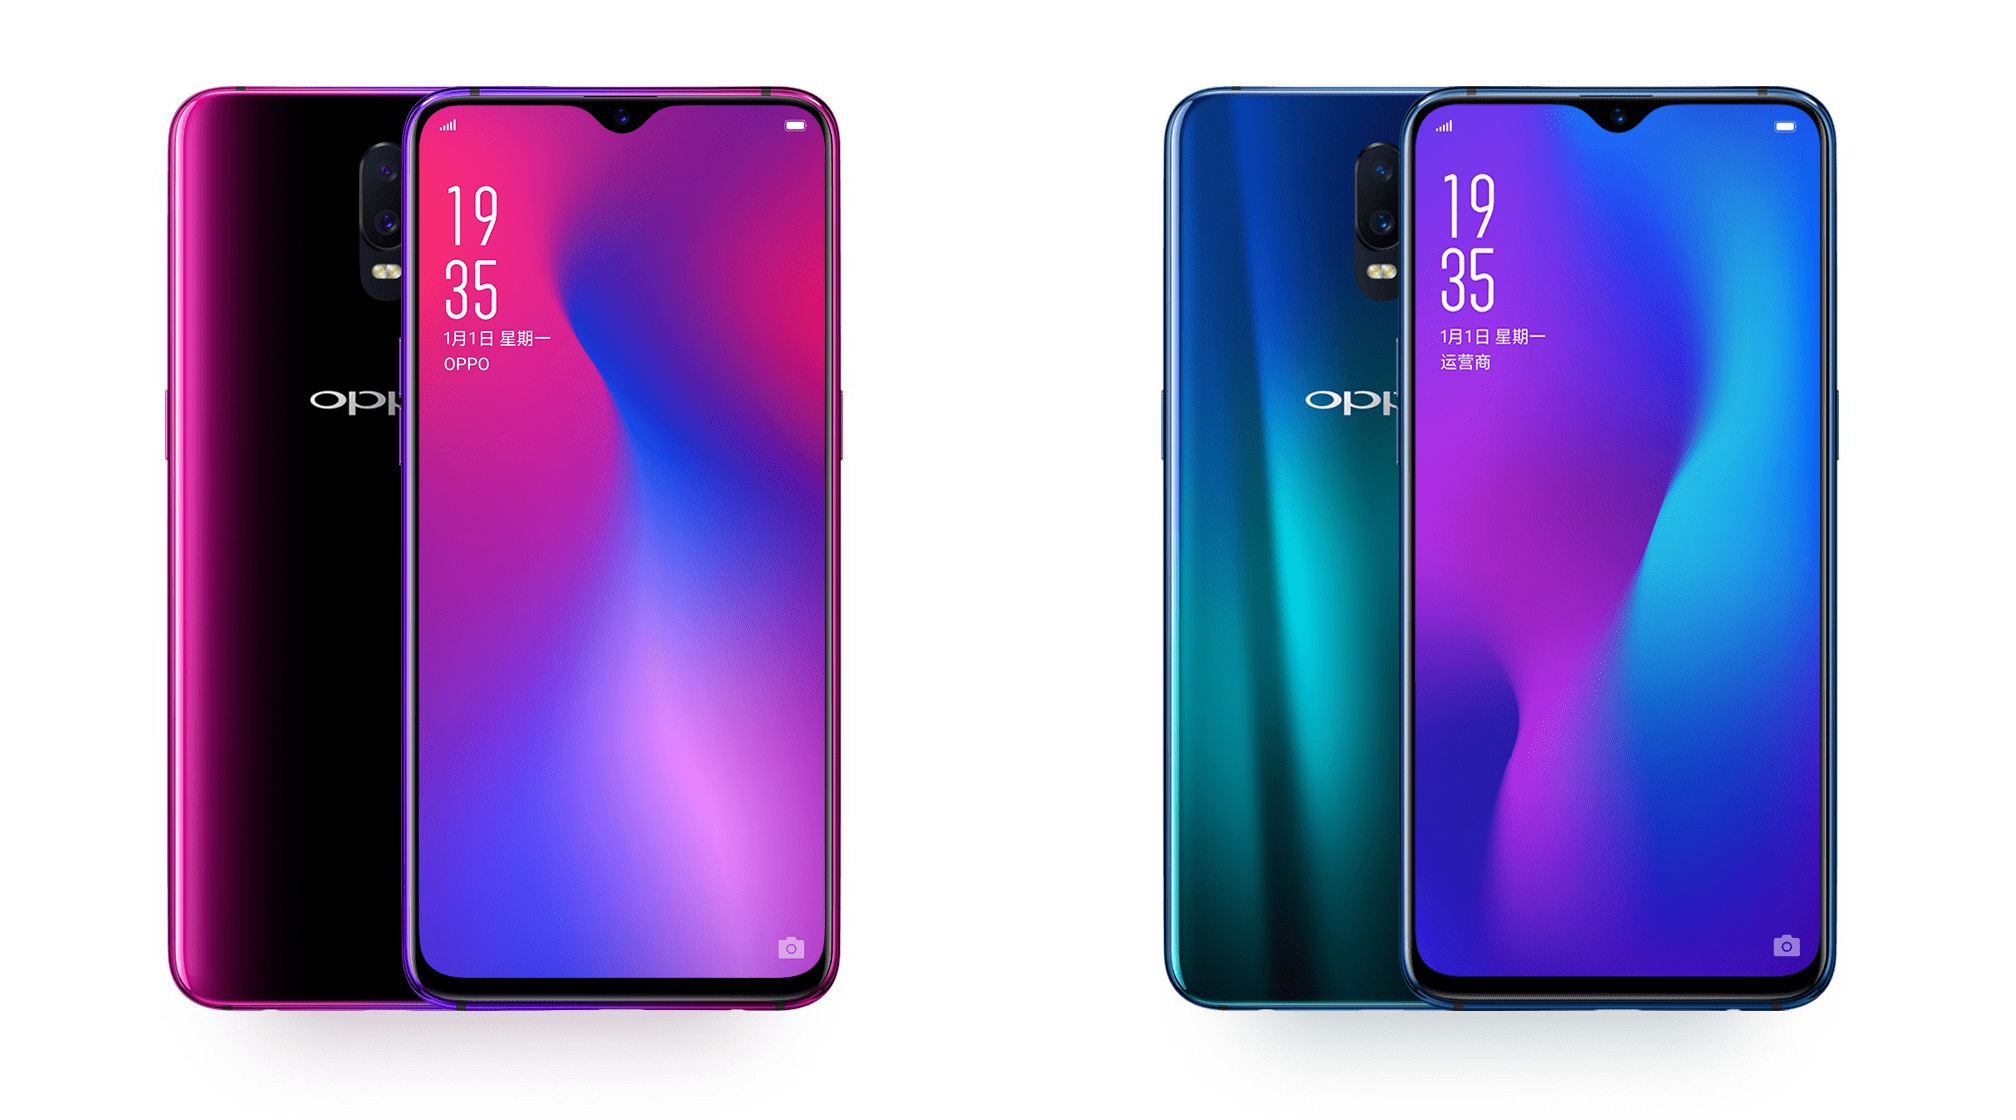 Oppo Reno 10x zoom Phone Specifications and Price – Deep Specs